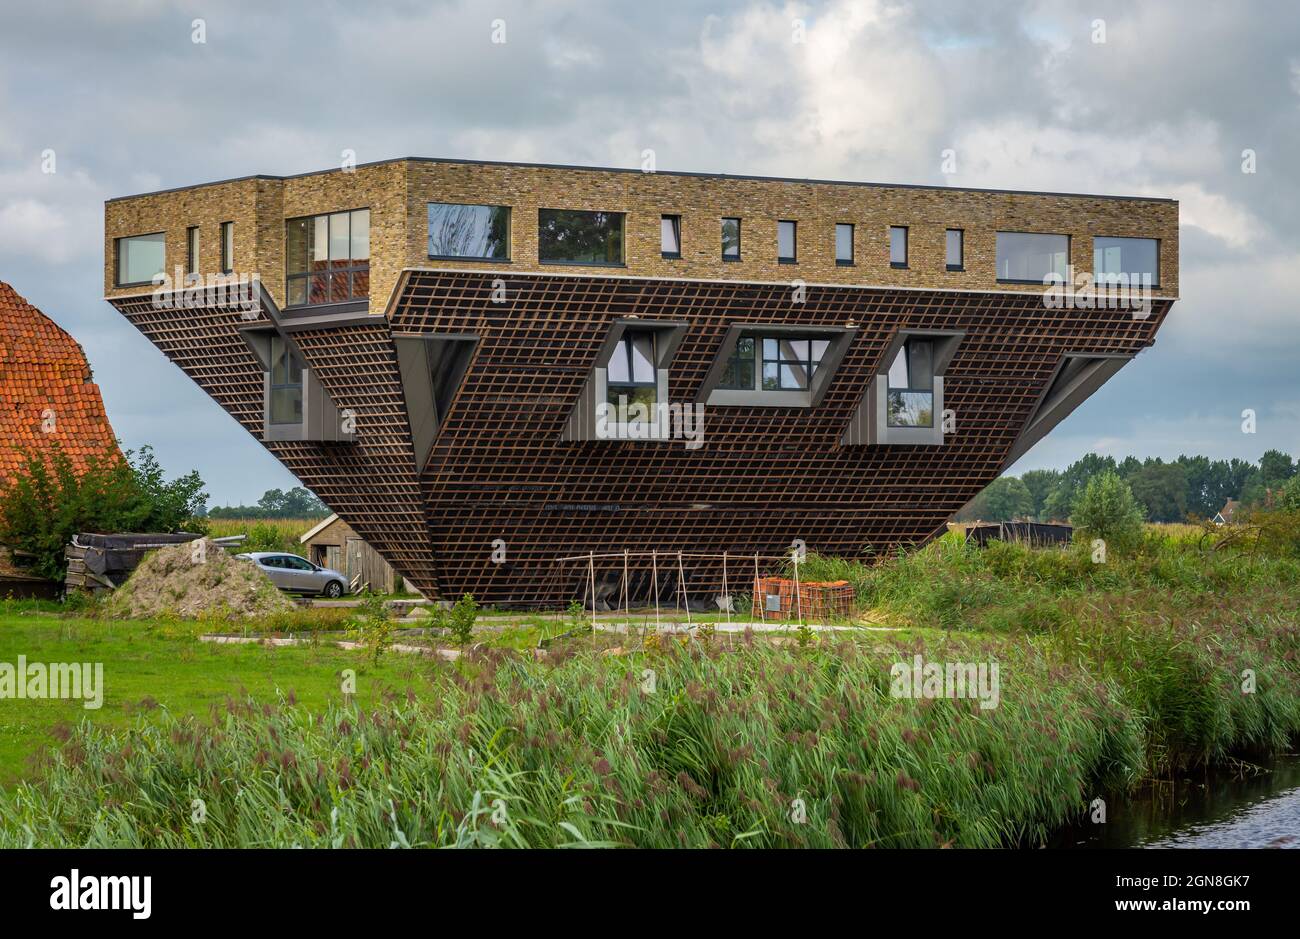 Upside down house in dutch countryside in the city Hindeloopen, an example of unusual, experimental architecture Stock Photo